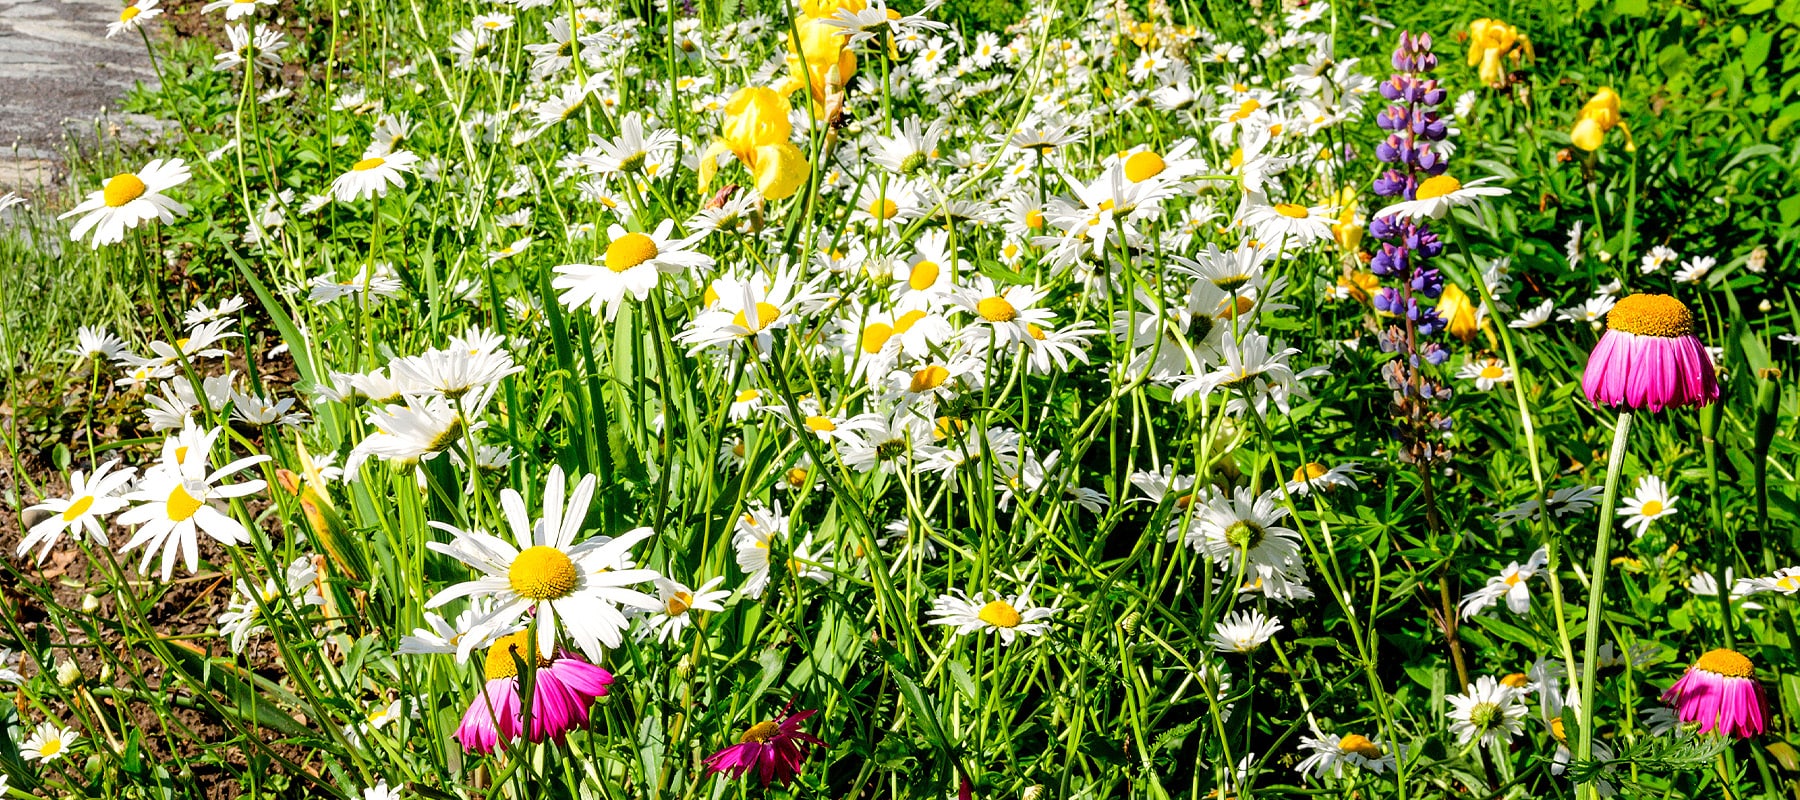 Wildflower Lawns: add some colour and flowers to your grass